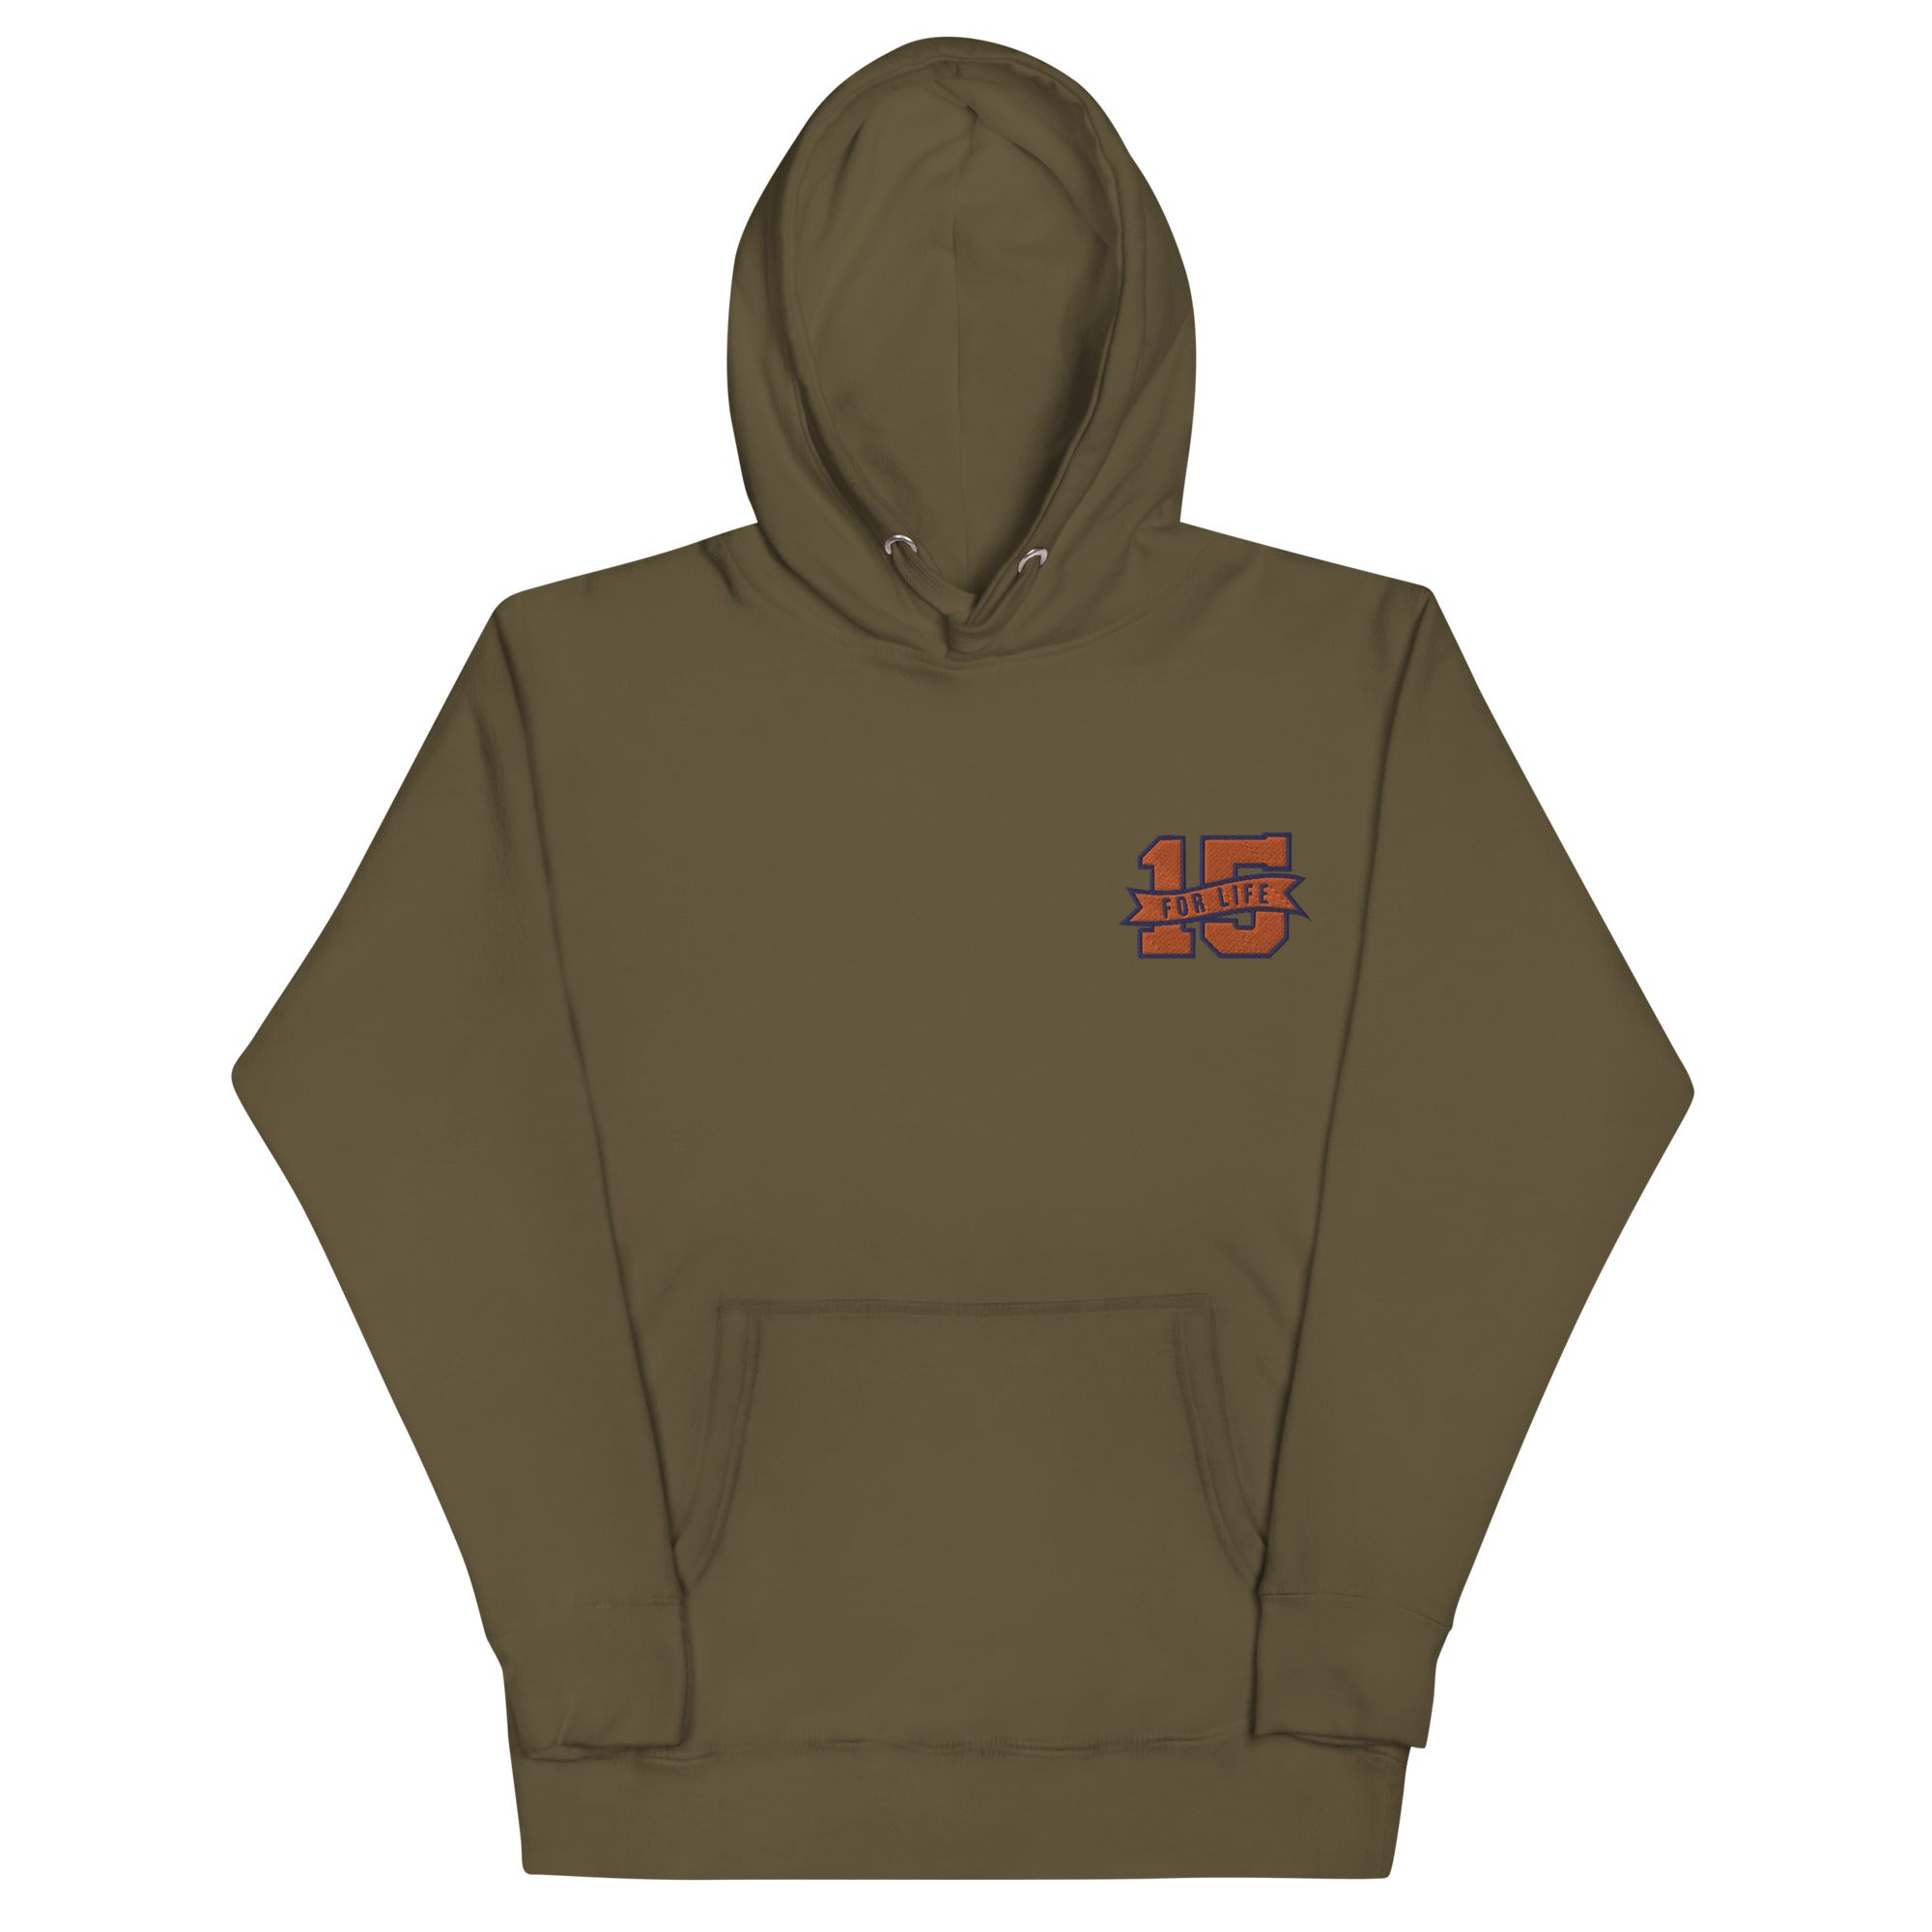 15 For Life Embroidered Unisex Hoodie